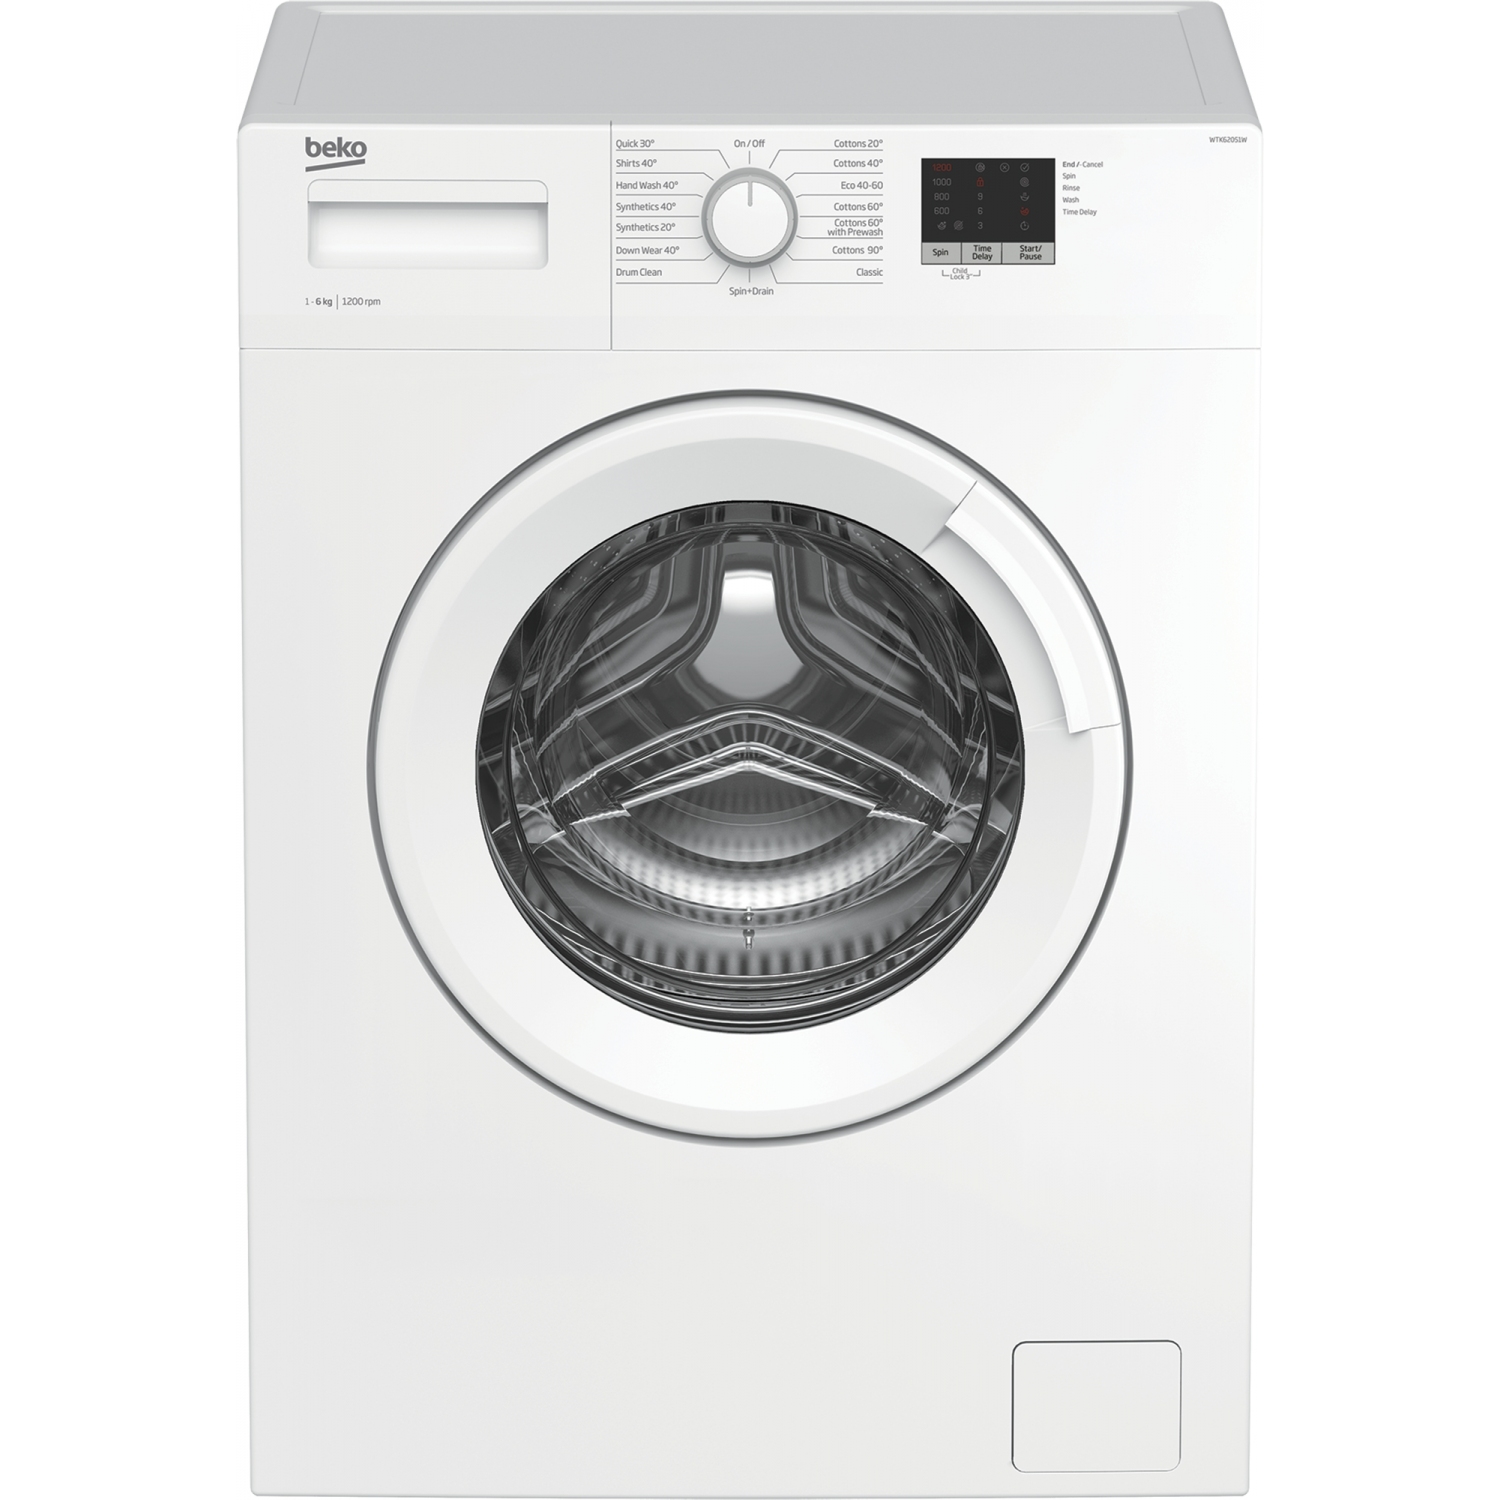 Beko WTK62051W 6Kg Washing Machine with 1200 rpm - White - A+++ Rated - 0